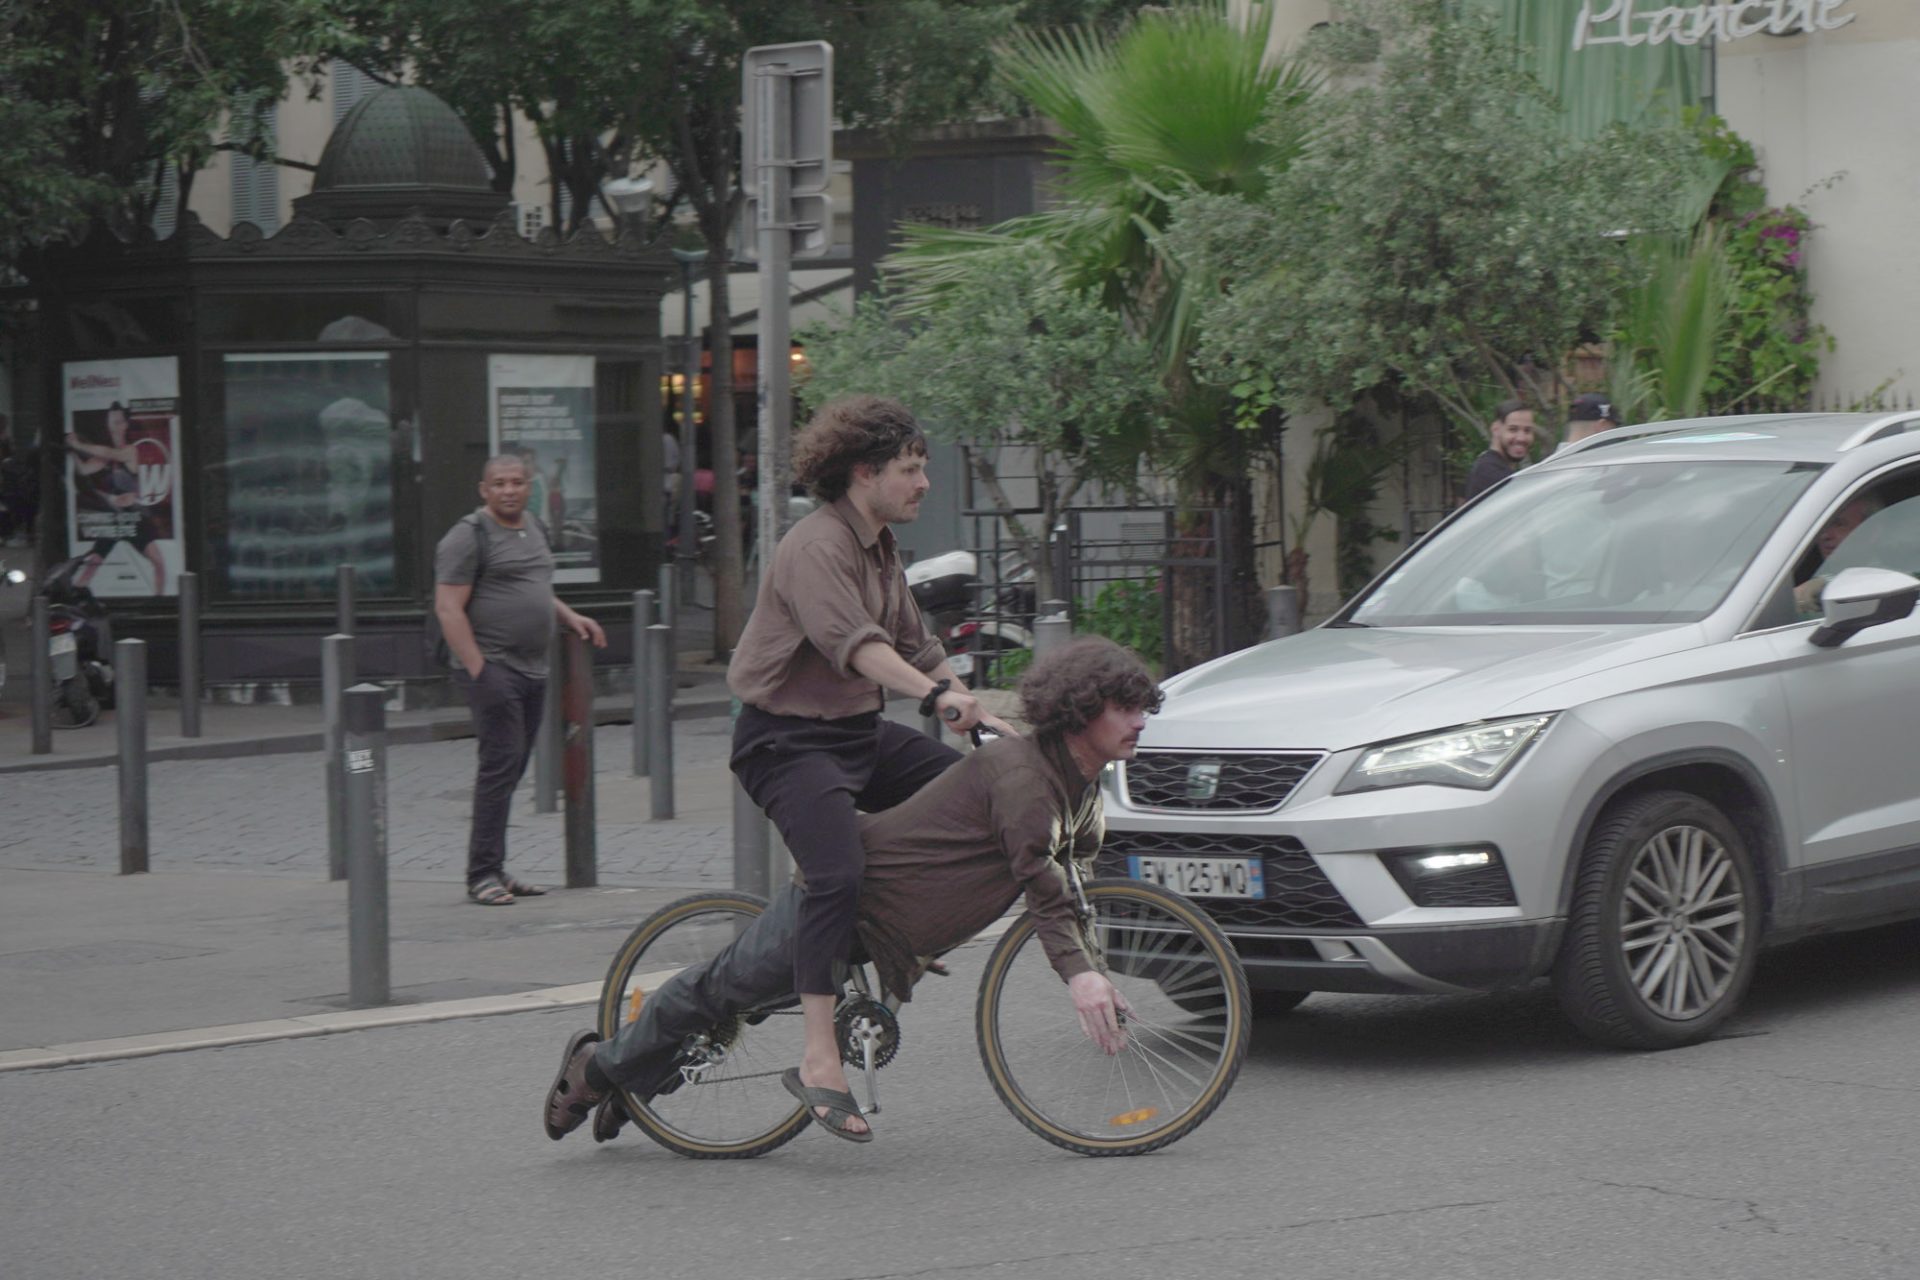 Barzic rides his bicycle through traffic. Two onlookers in the background watch with visible amusement. 